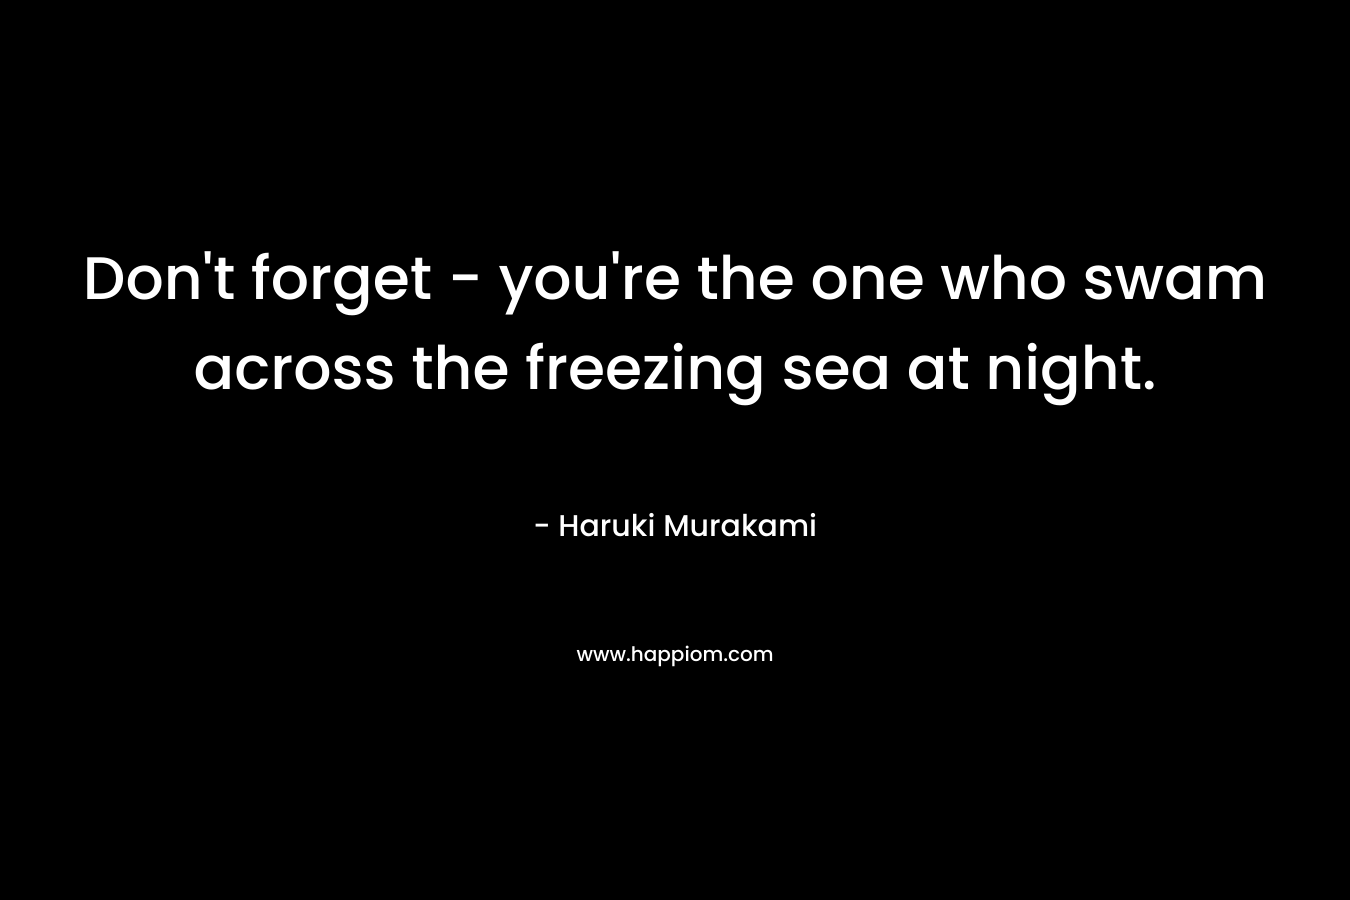 Don't forget - you're the one who swam across the freezing sea at night.